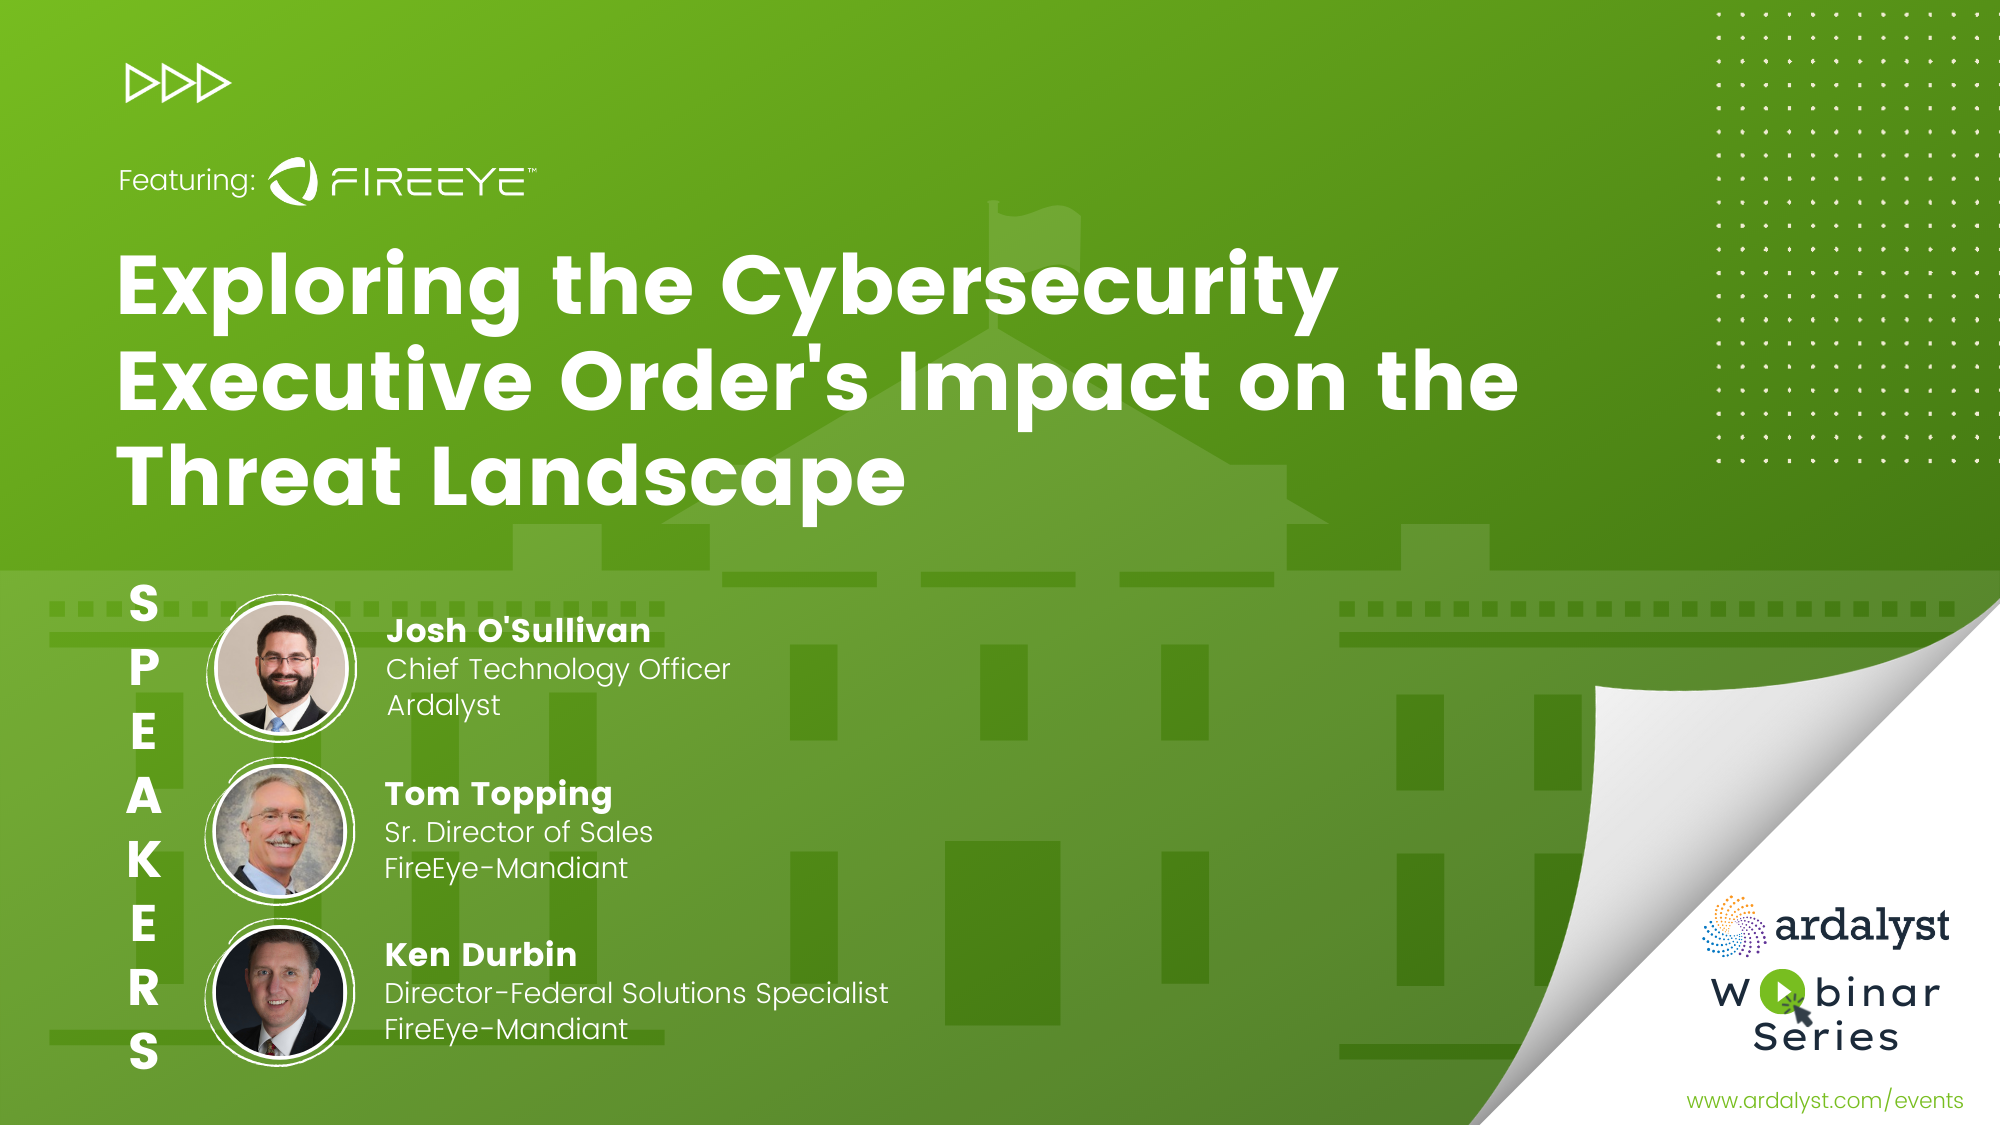 Exploring the Cybersecurity Executive Order's Impact on the Threat Landscape